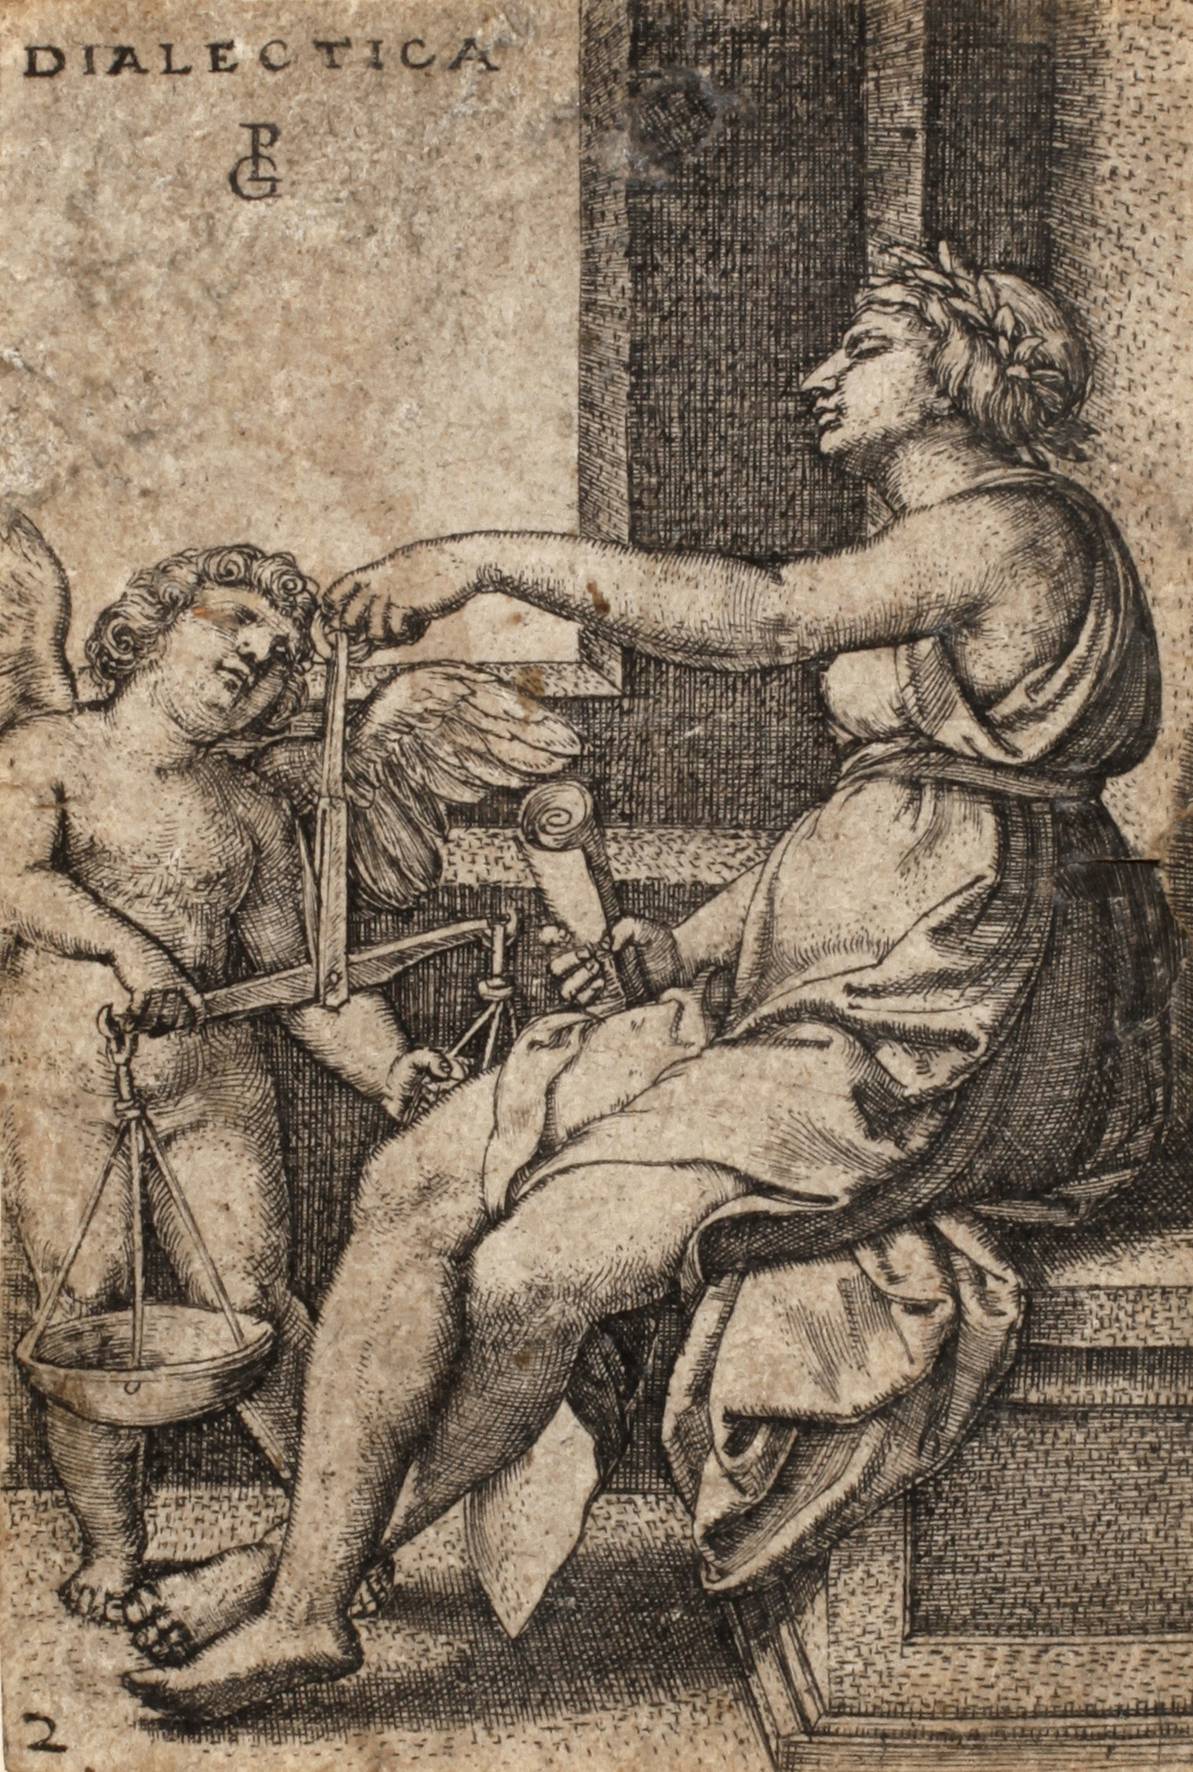 Georg Pencz, ”Dialectica”